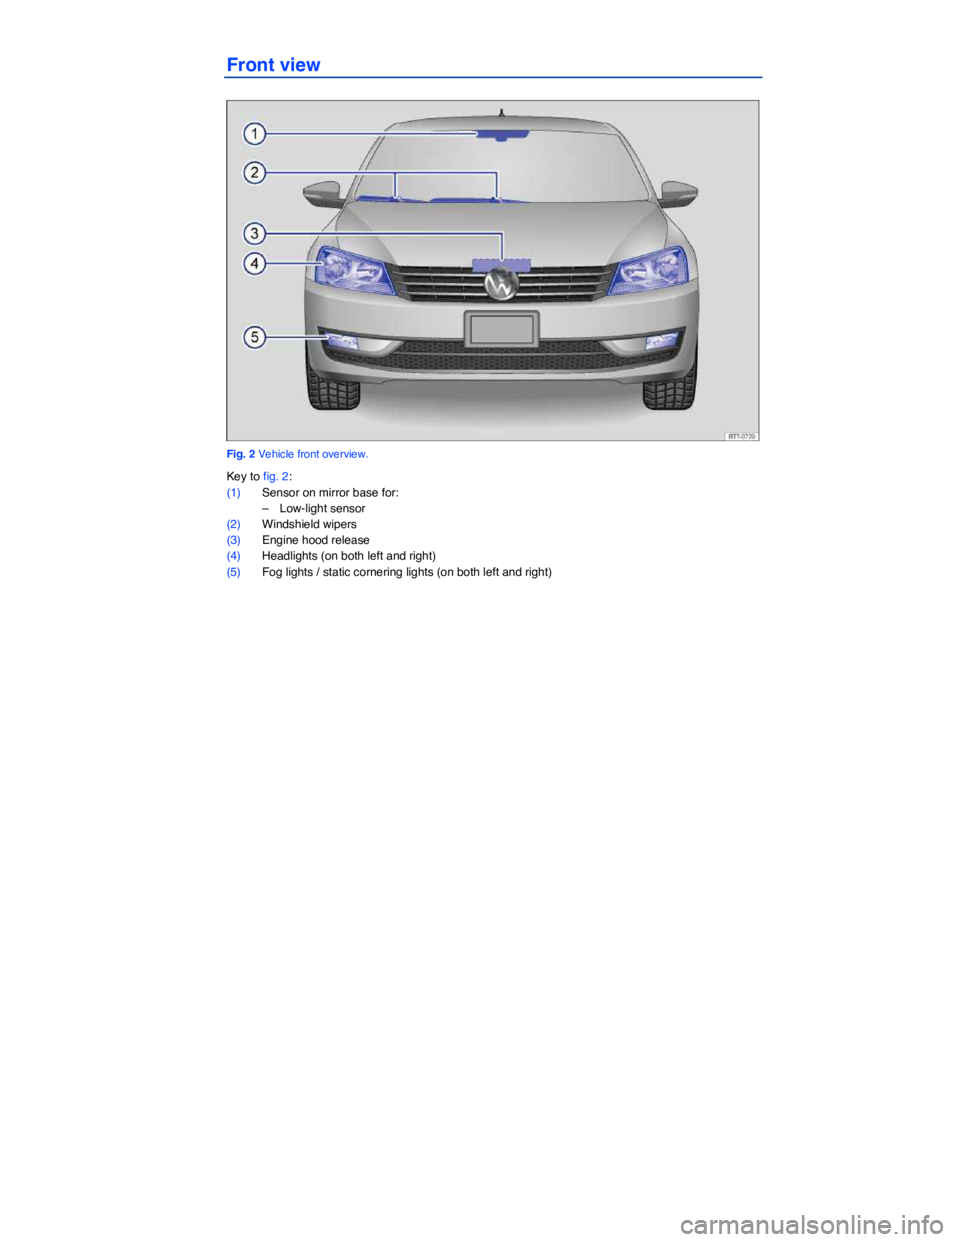 VOLKSWAGEN PASSAT 2010  Owners Manual  
Front view 
 
Fig. 2 Vehicle front overview. 
Key to fig. 2: 
(1) Sensor on mirror base for: 
–  Low-light sensor  
(2) Windshield wipers  
(3) Engine hood release  
(4) Headlights (on both left a